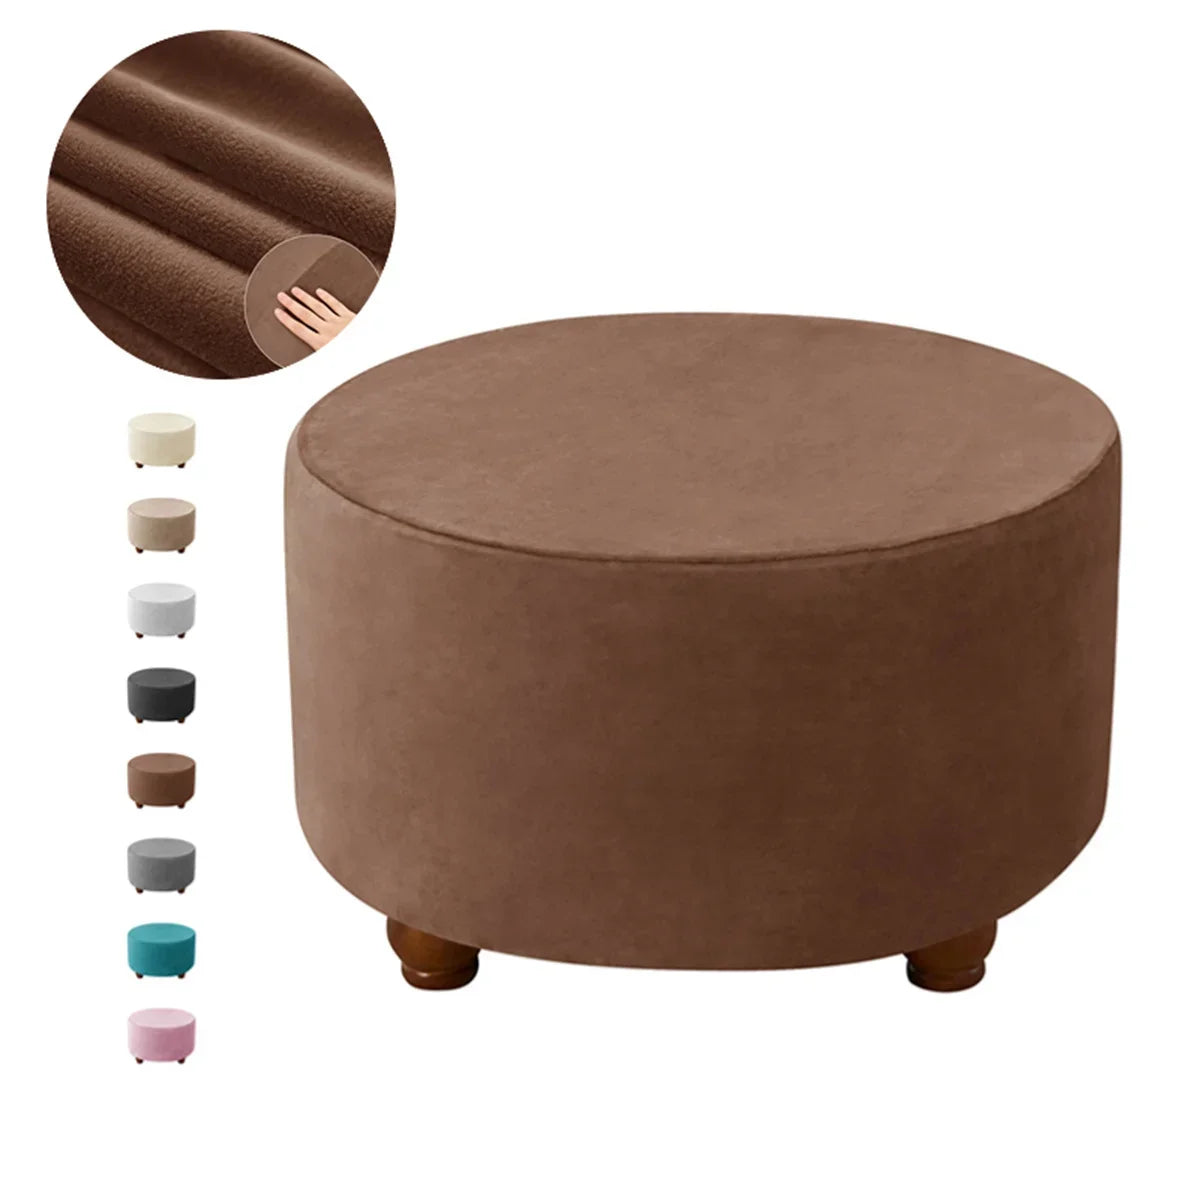 Ottoman Stool Cover Velvet Round Elastic Sofa Footrest Cover Washable All-inclusive Footstool Seat Slipcover Furniture Protector ShopOnlyDeal